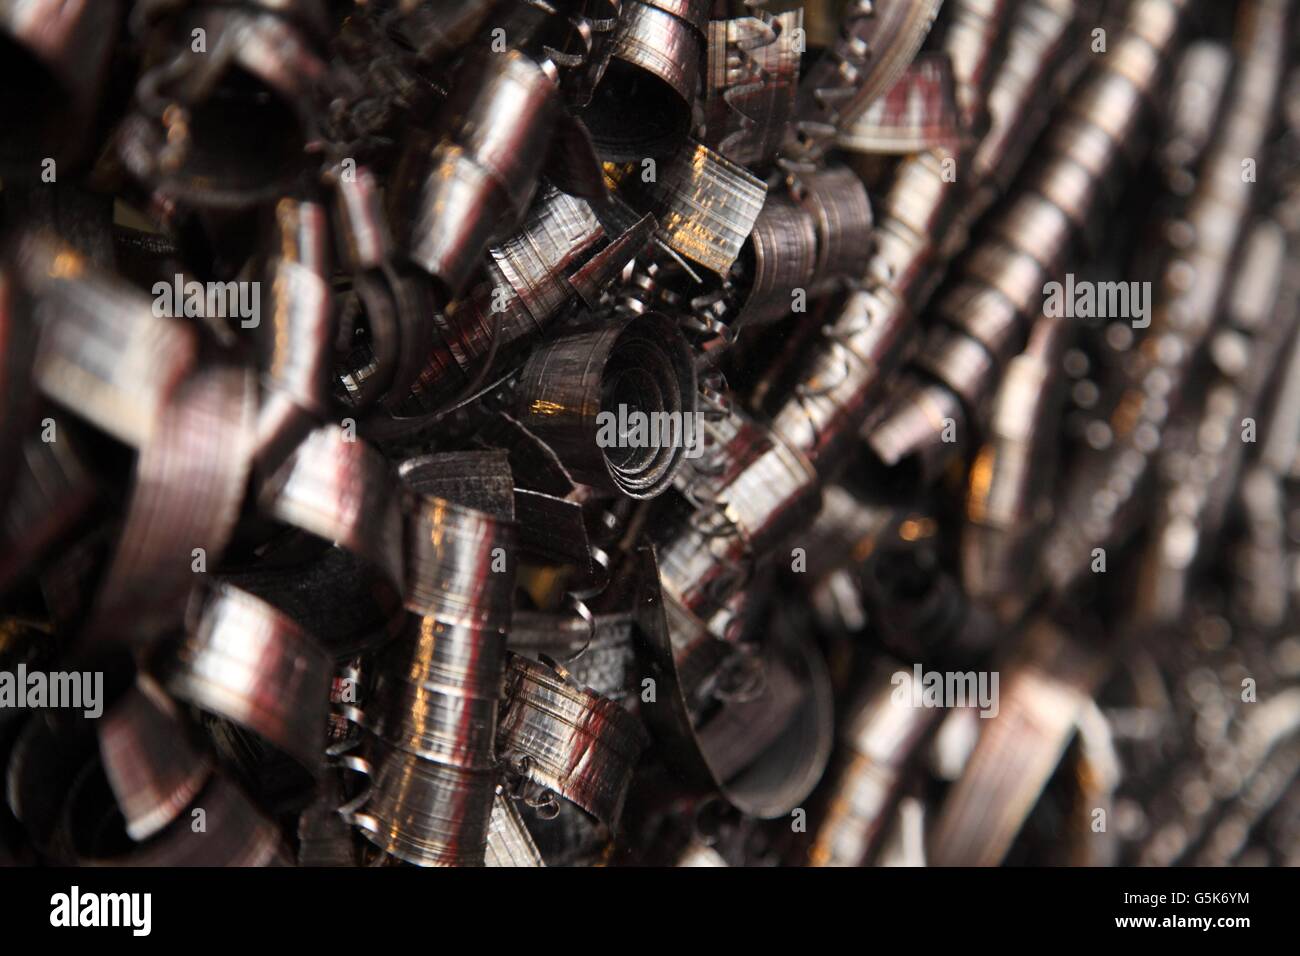 Metal swarf in tight coils Stock Photo